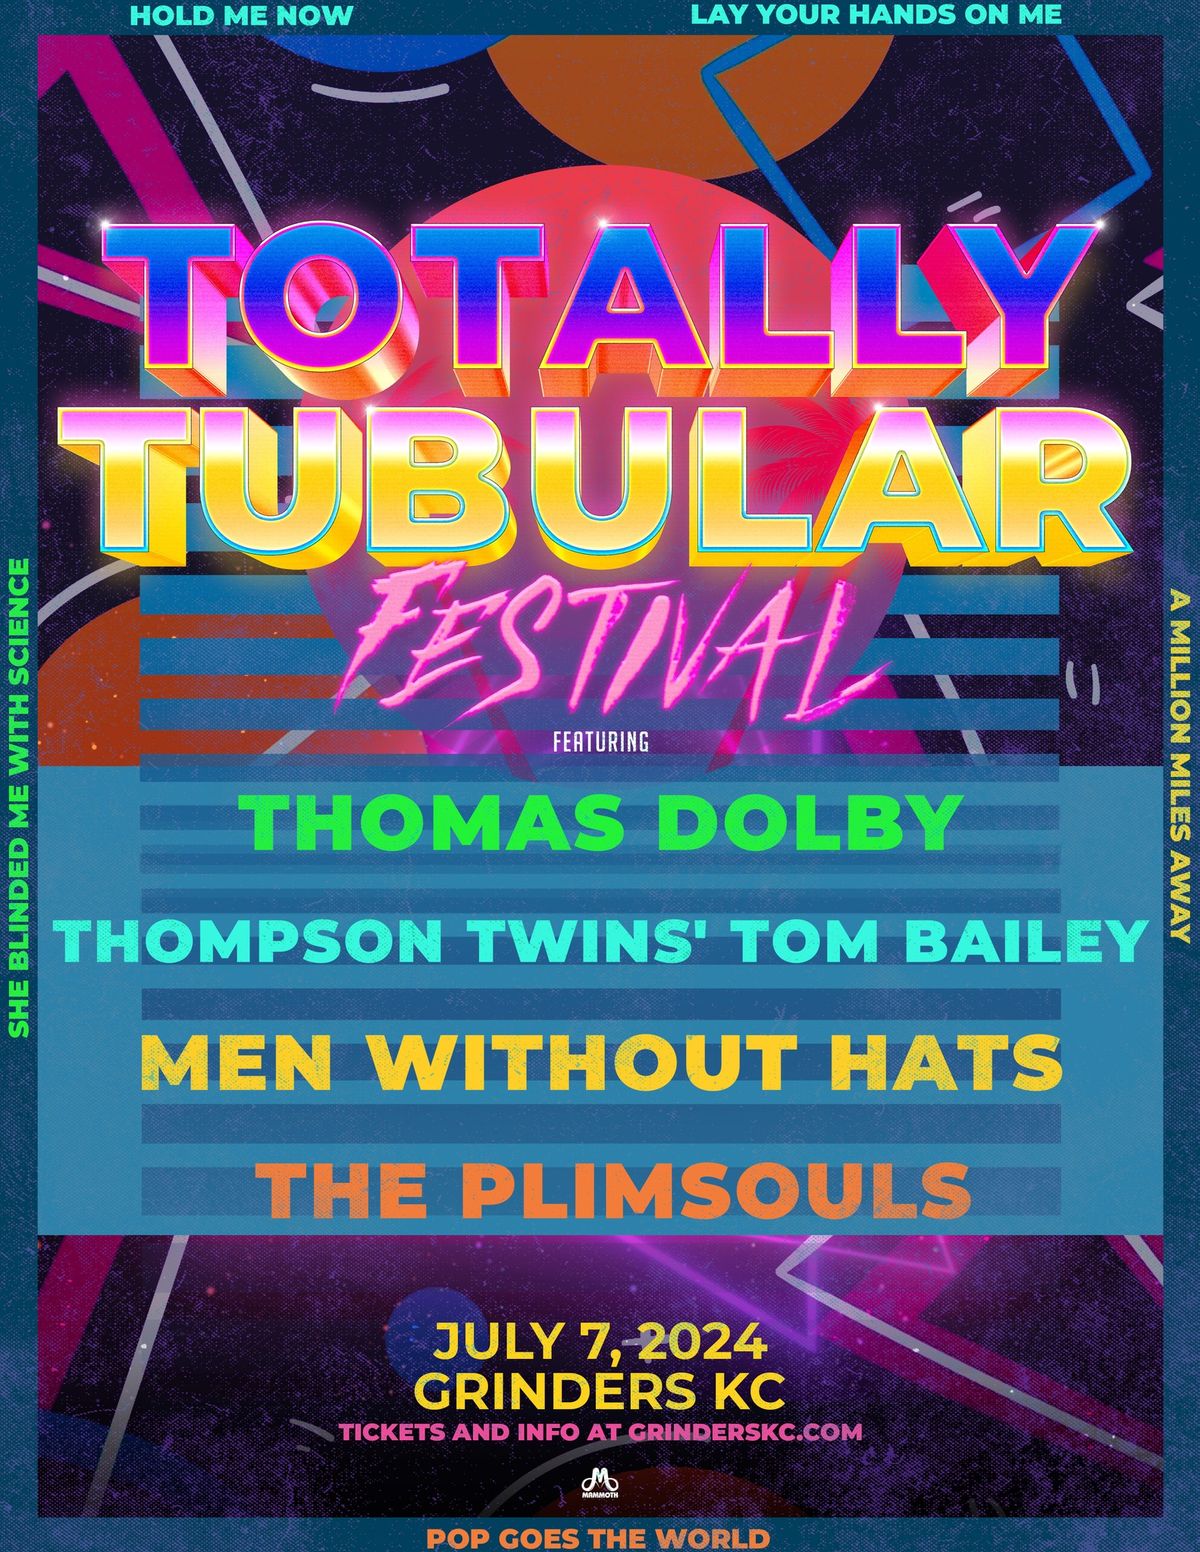 Totally Tubular Festival - MOVED TO UPTOWN THEATER